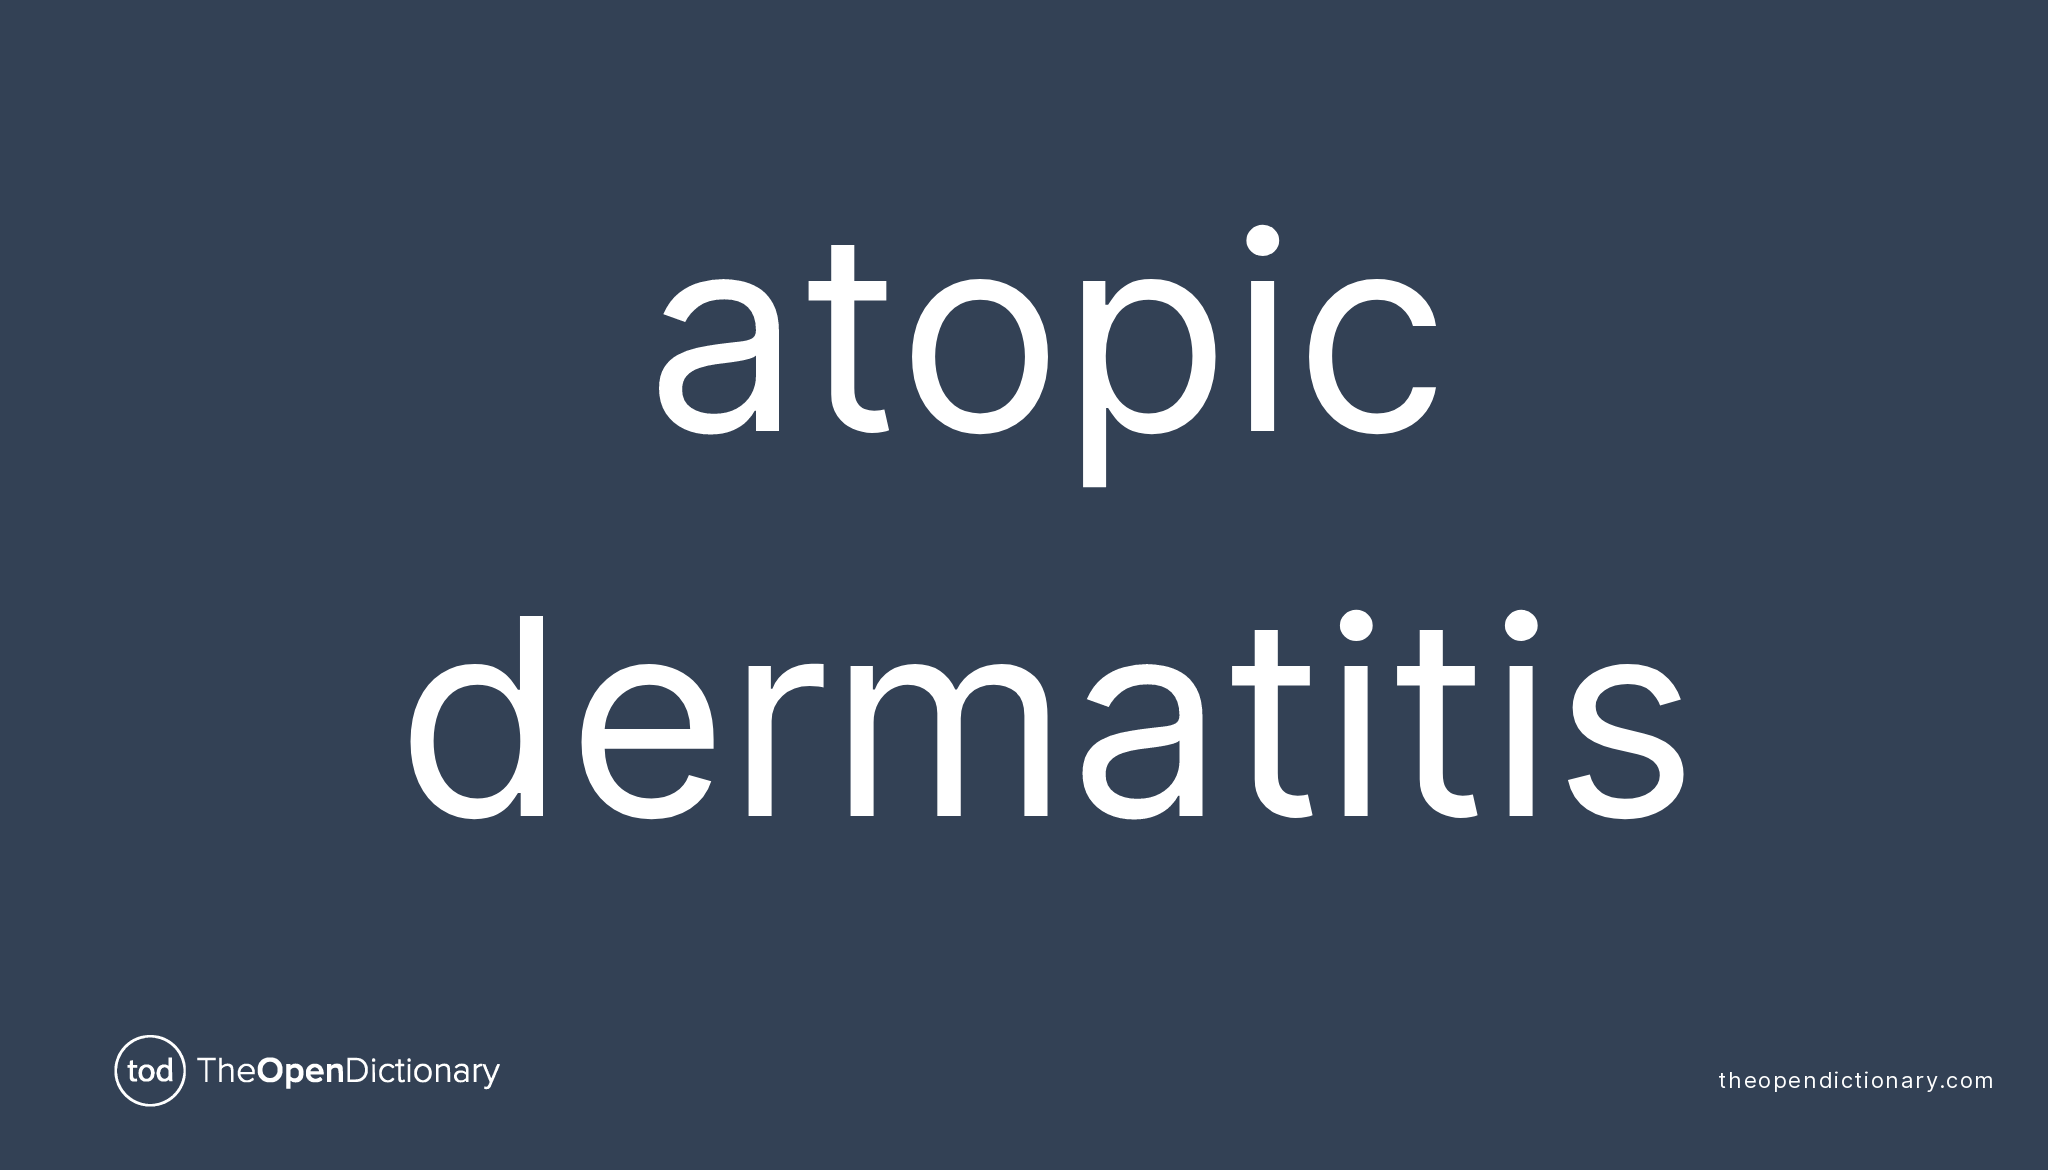 Atopic dermatitis | Meaning of Atopic dermatitis | Definition of Atopic ...